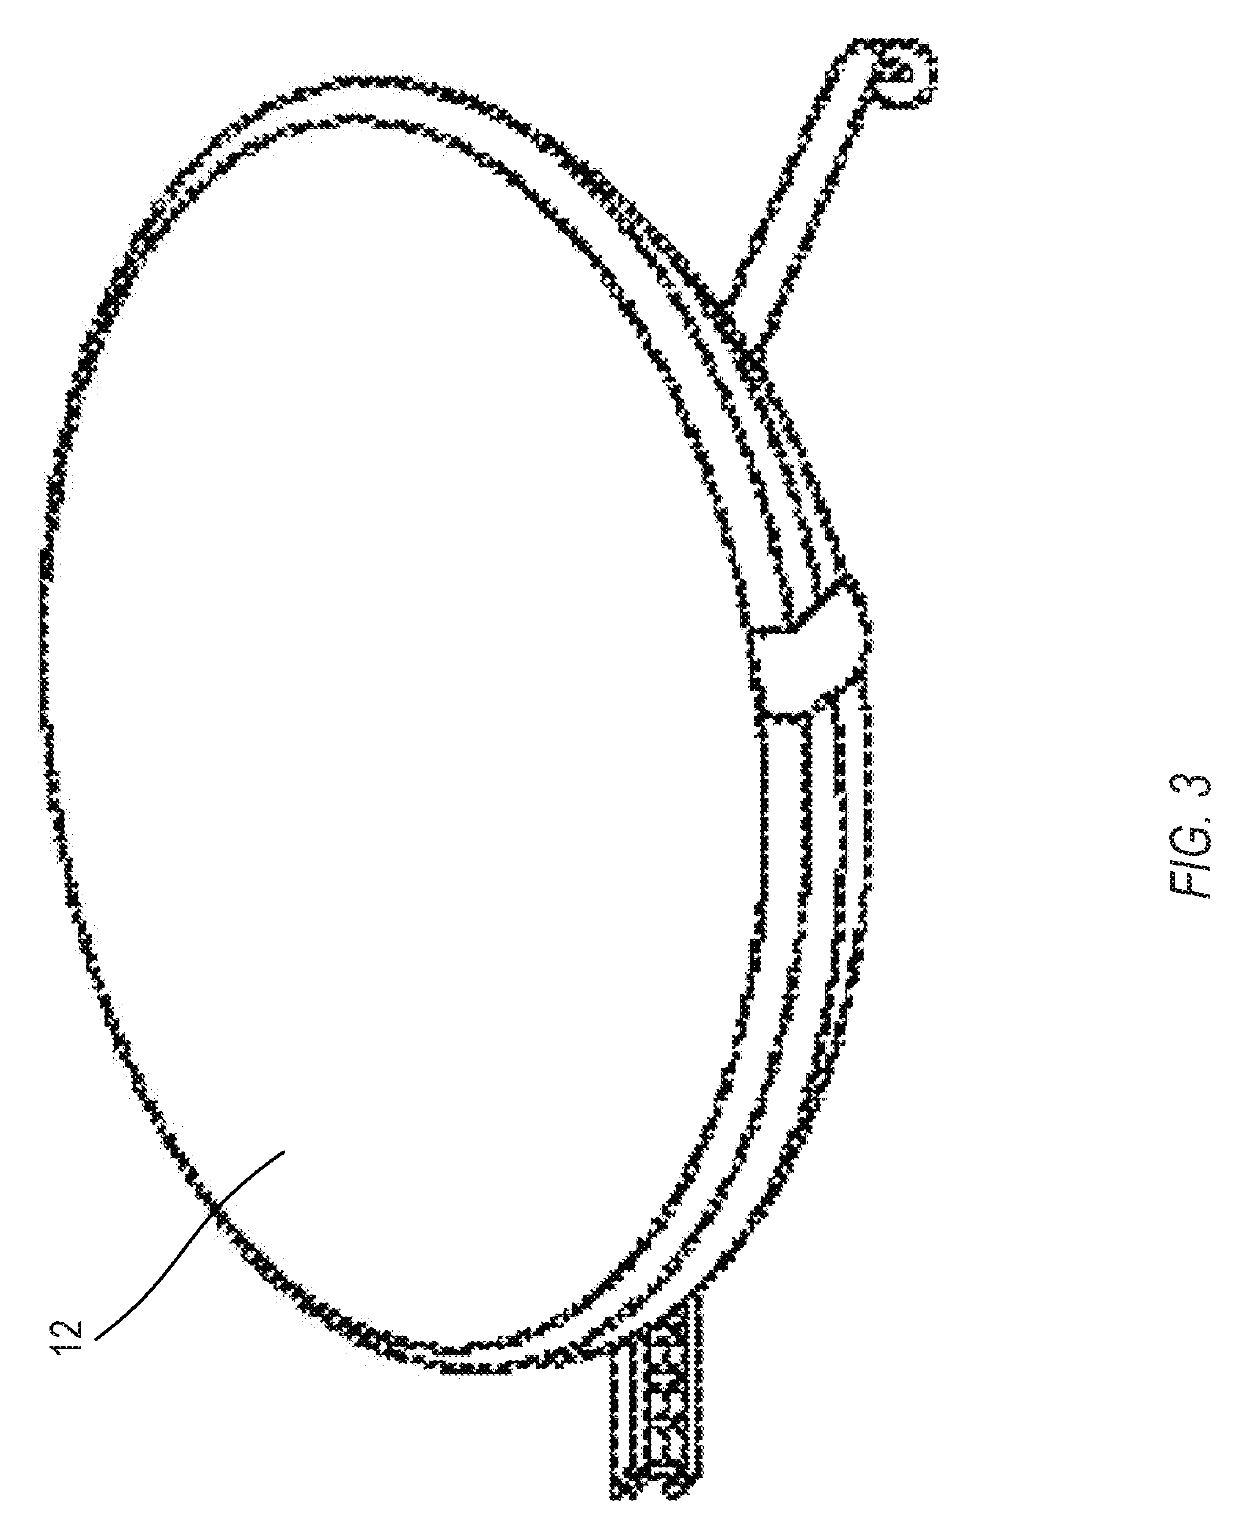 Spatial radiometric correction of an optical system having a color filter mosaic